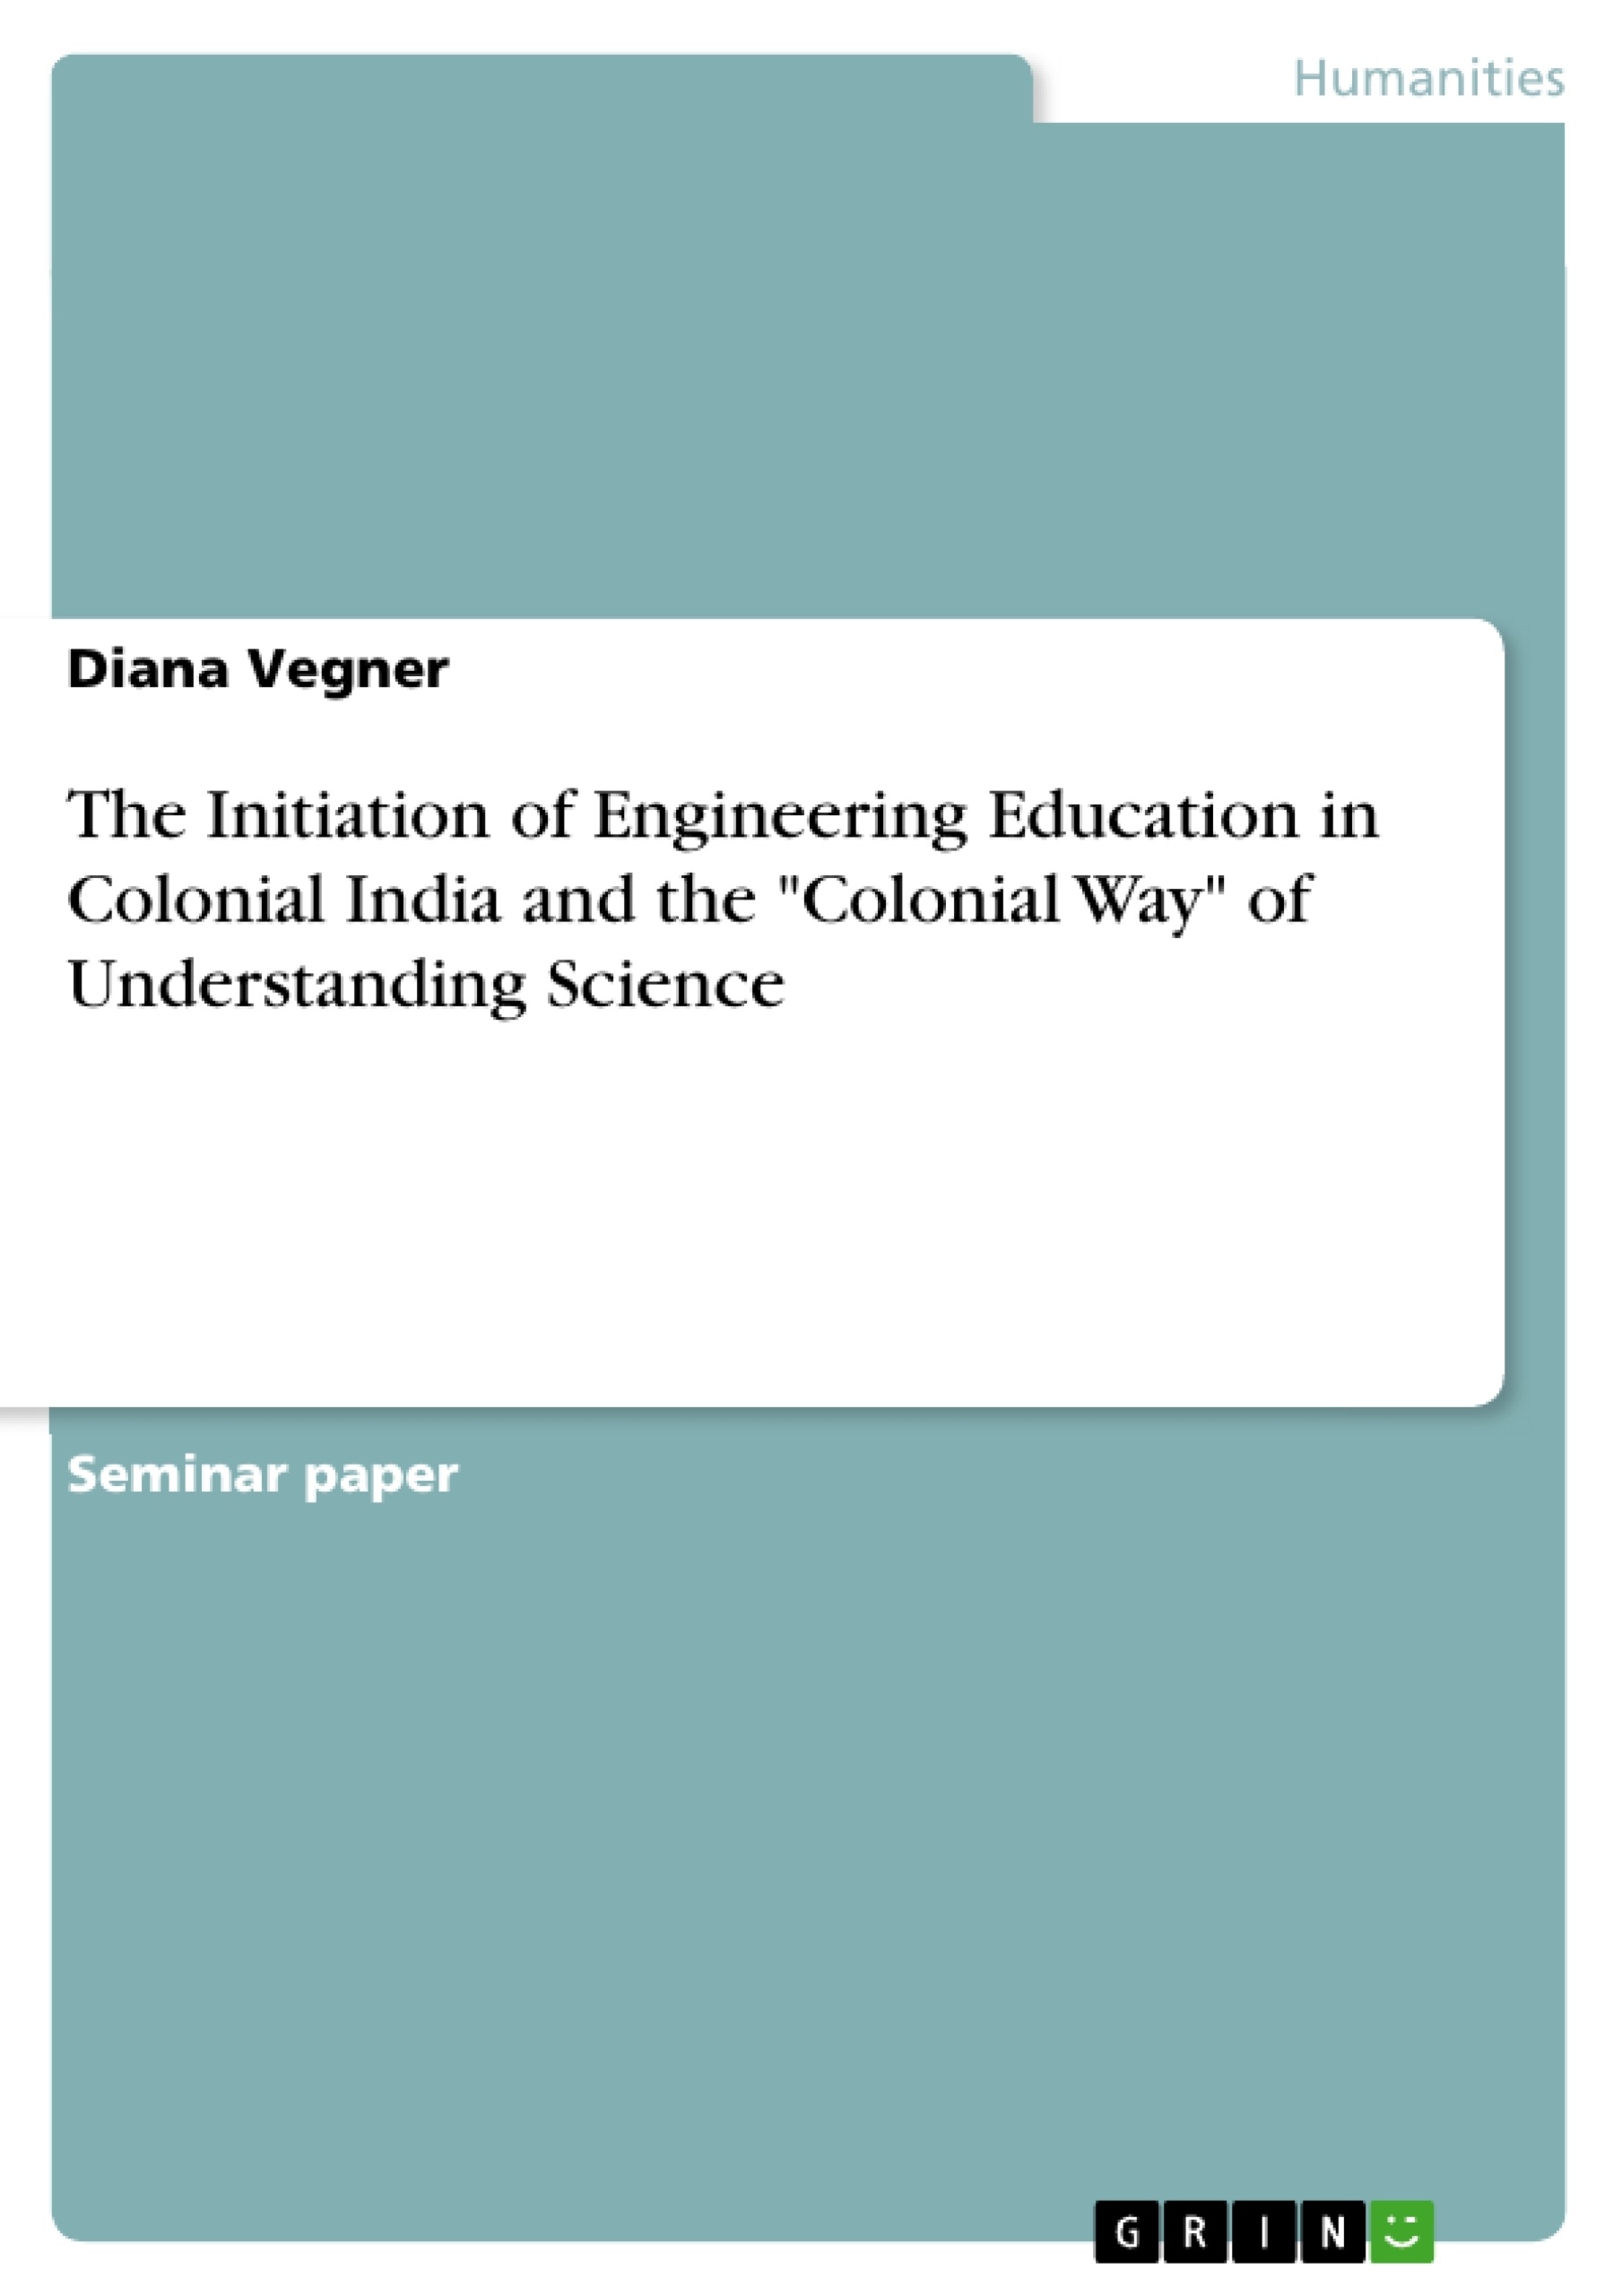 Title: The Initiation of Engineering Education in Colonial India and the "Colonial Way" of Understanding Science